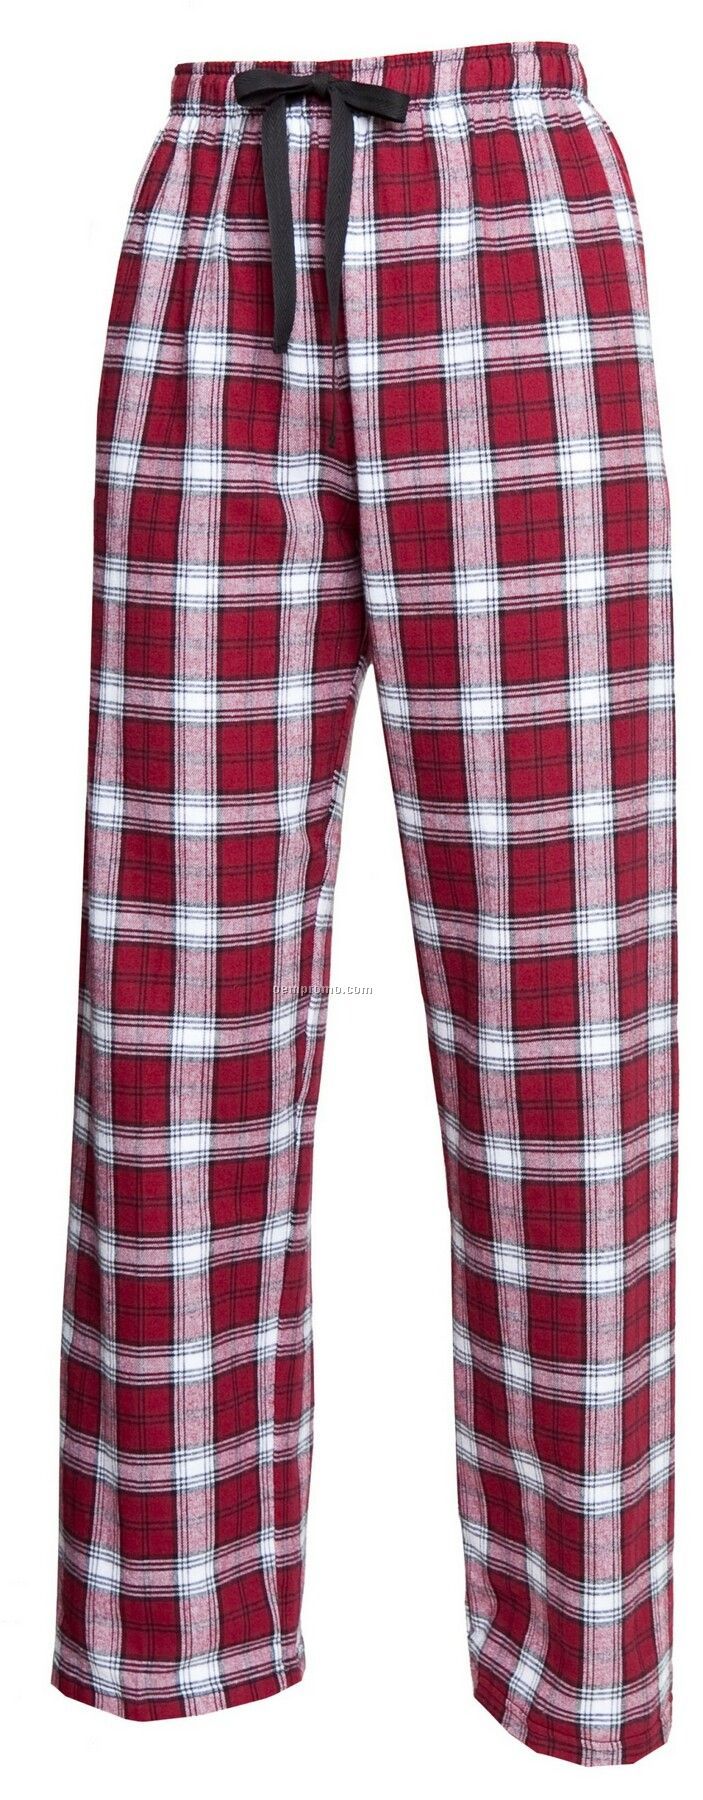 Youth Team Pride Flannel Pant In Maroon Red & White Plaid